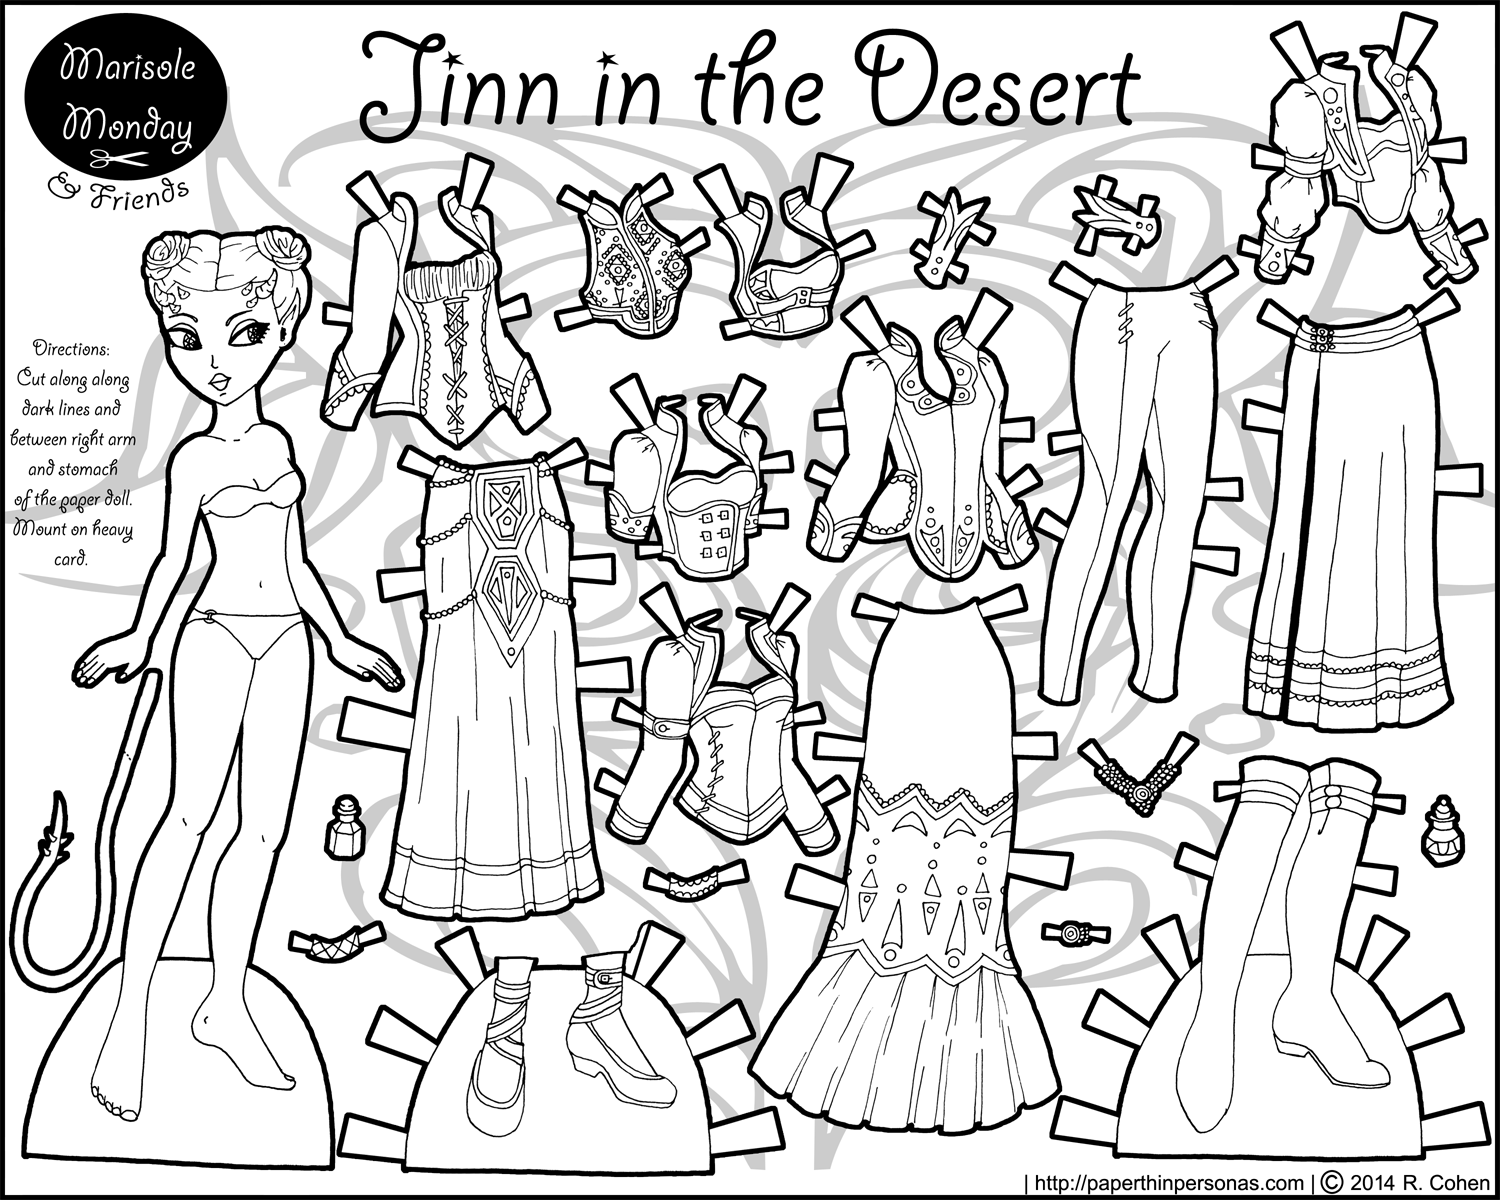 jinn-in-the-desert-in-black-and-white-paper-thin-personas